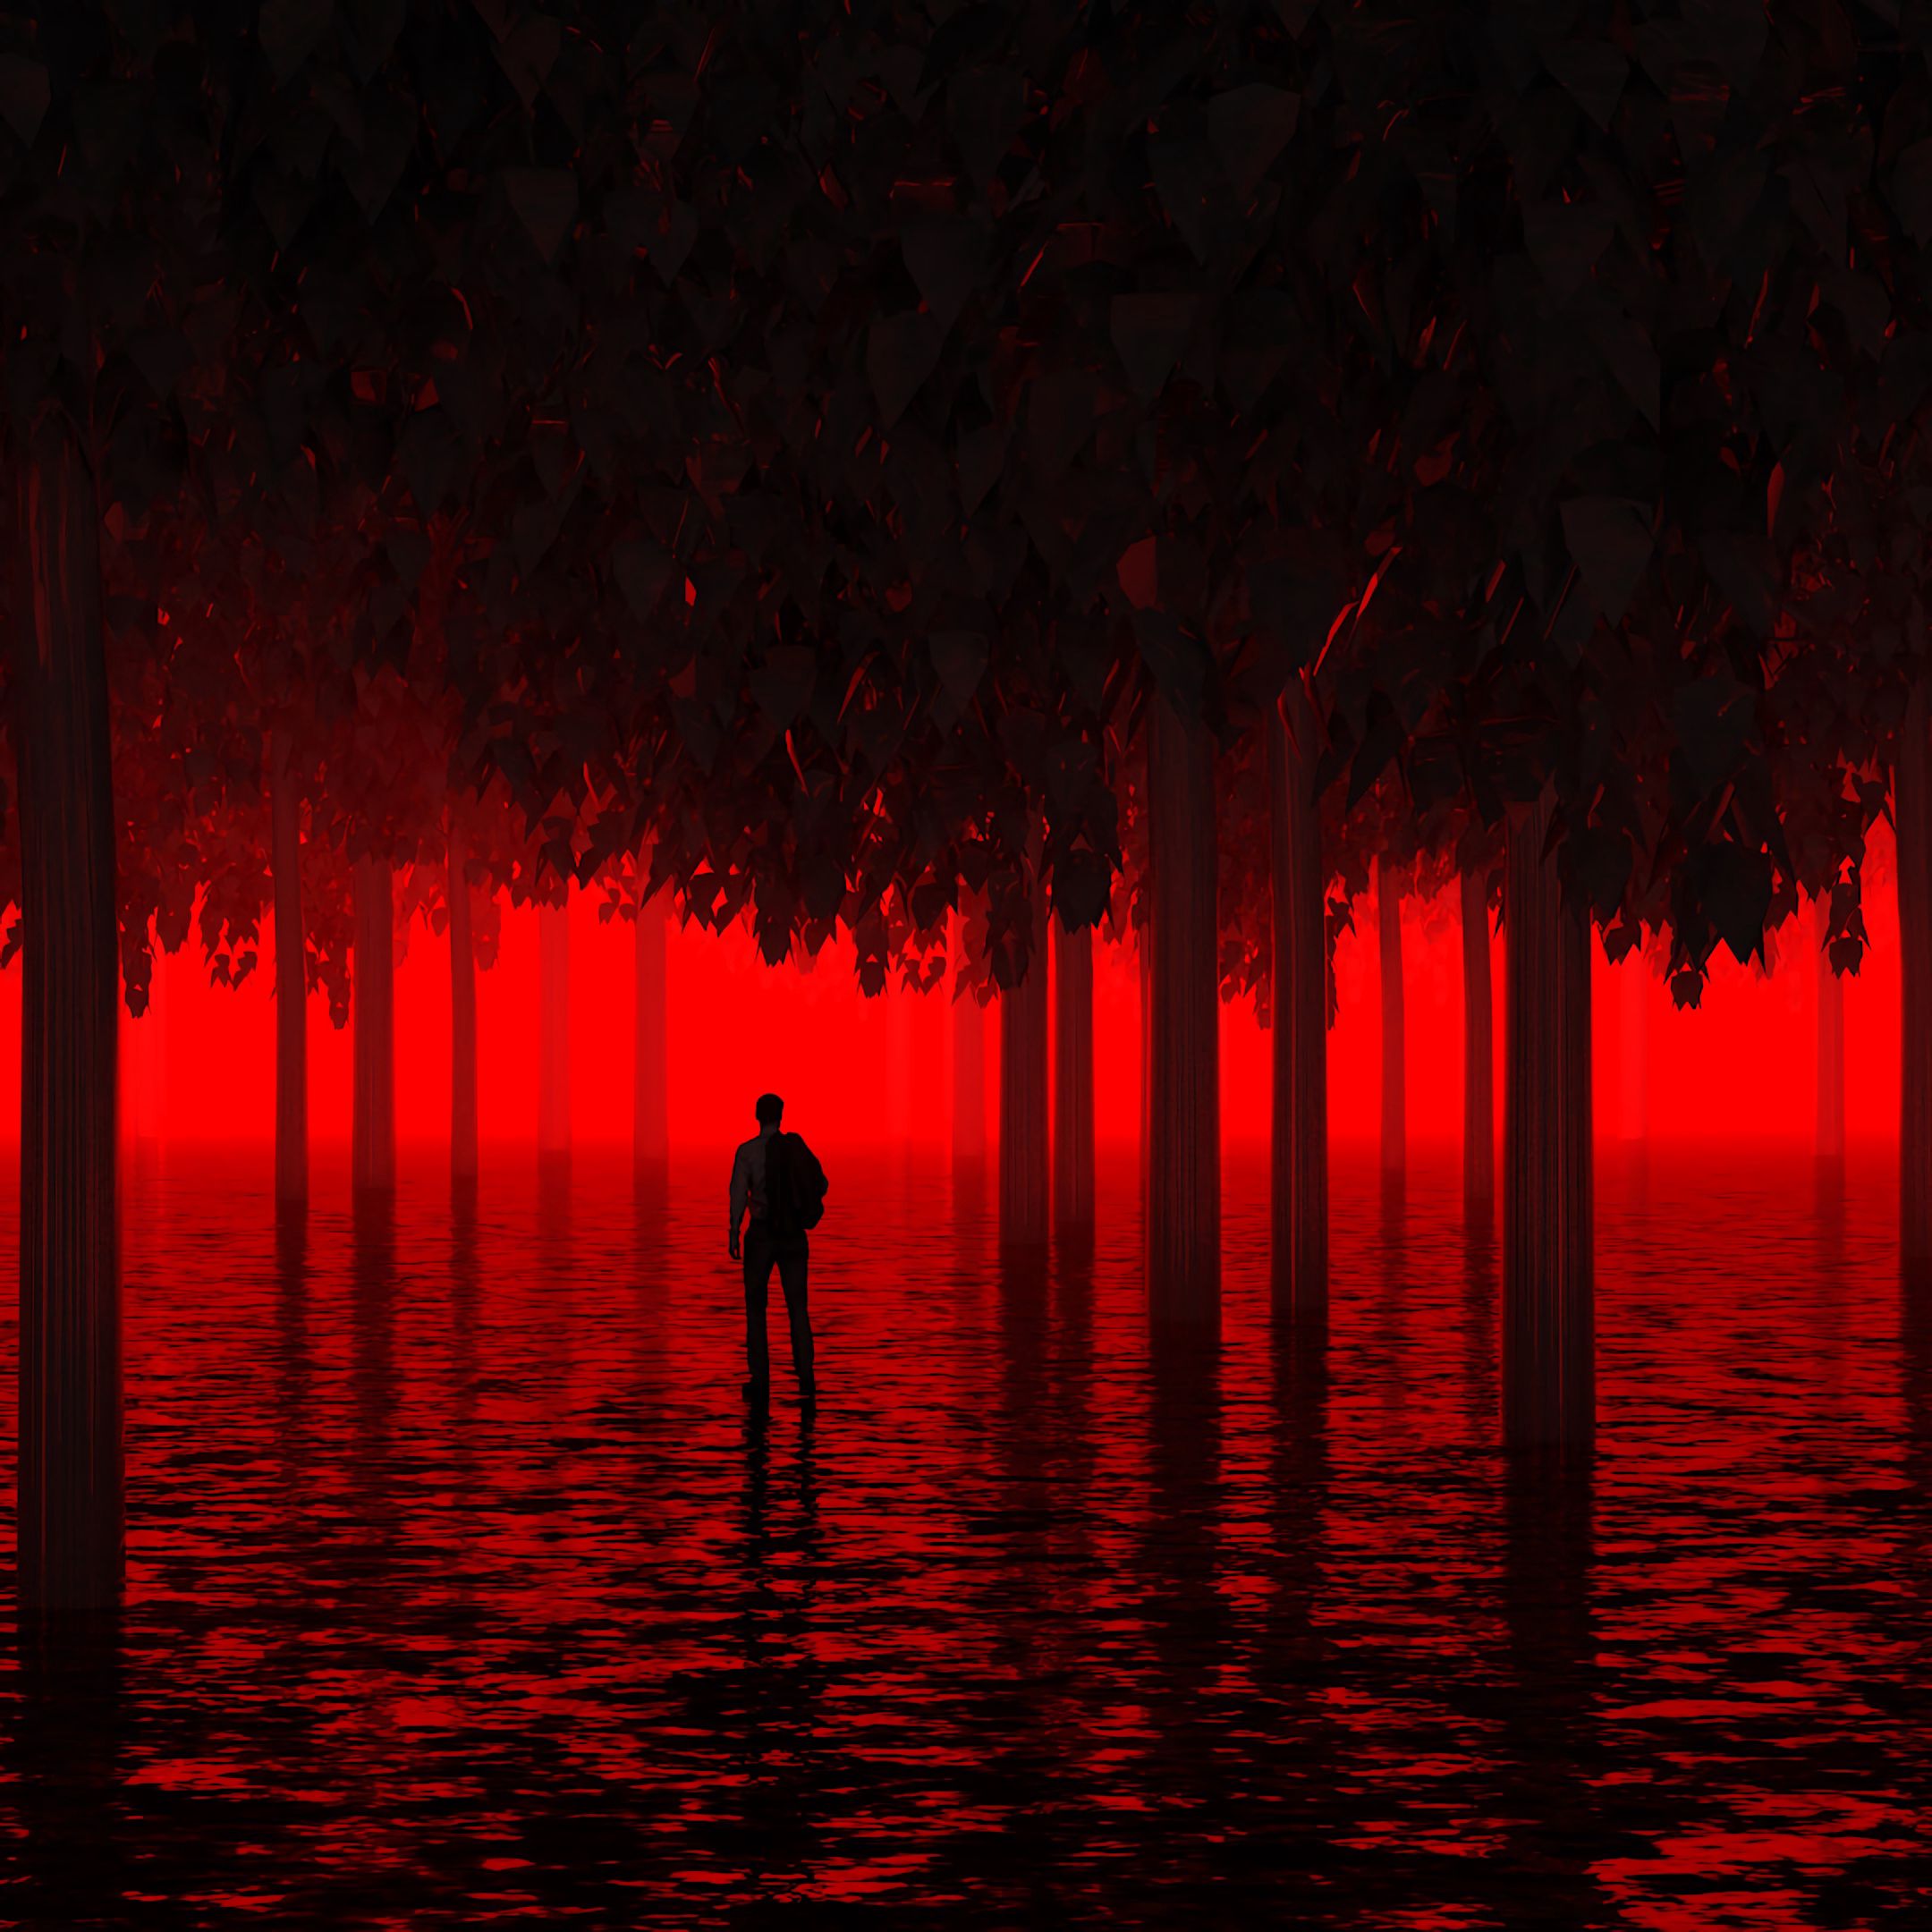 light, neon, human, dark, water, trees, red, shine, person, flooded, submerged 4K Ultra